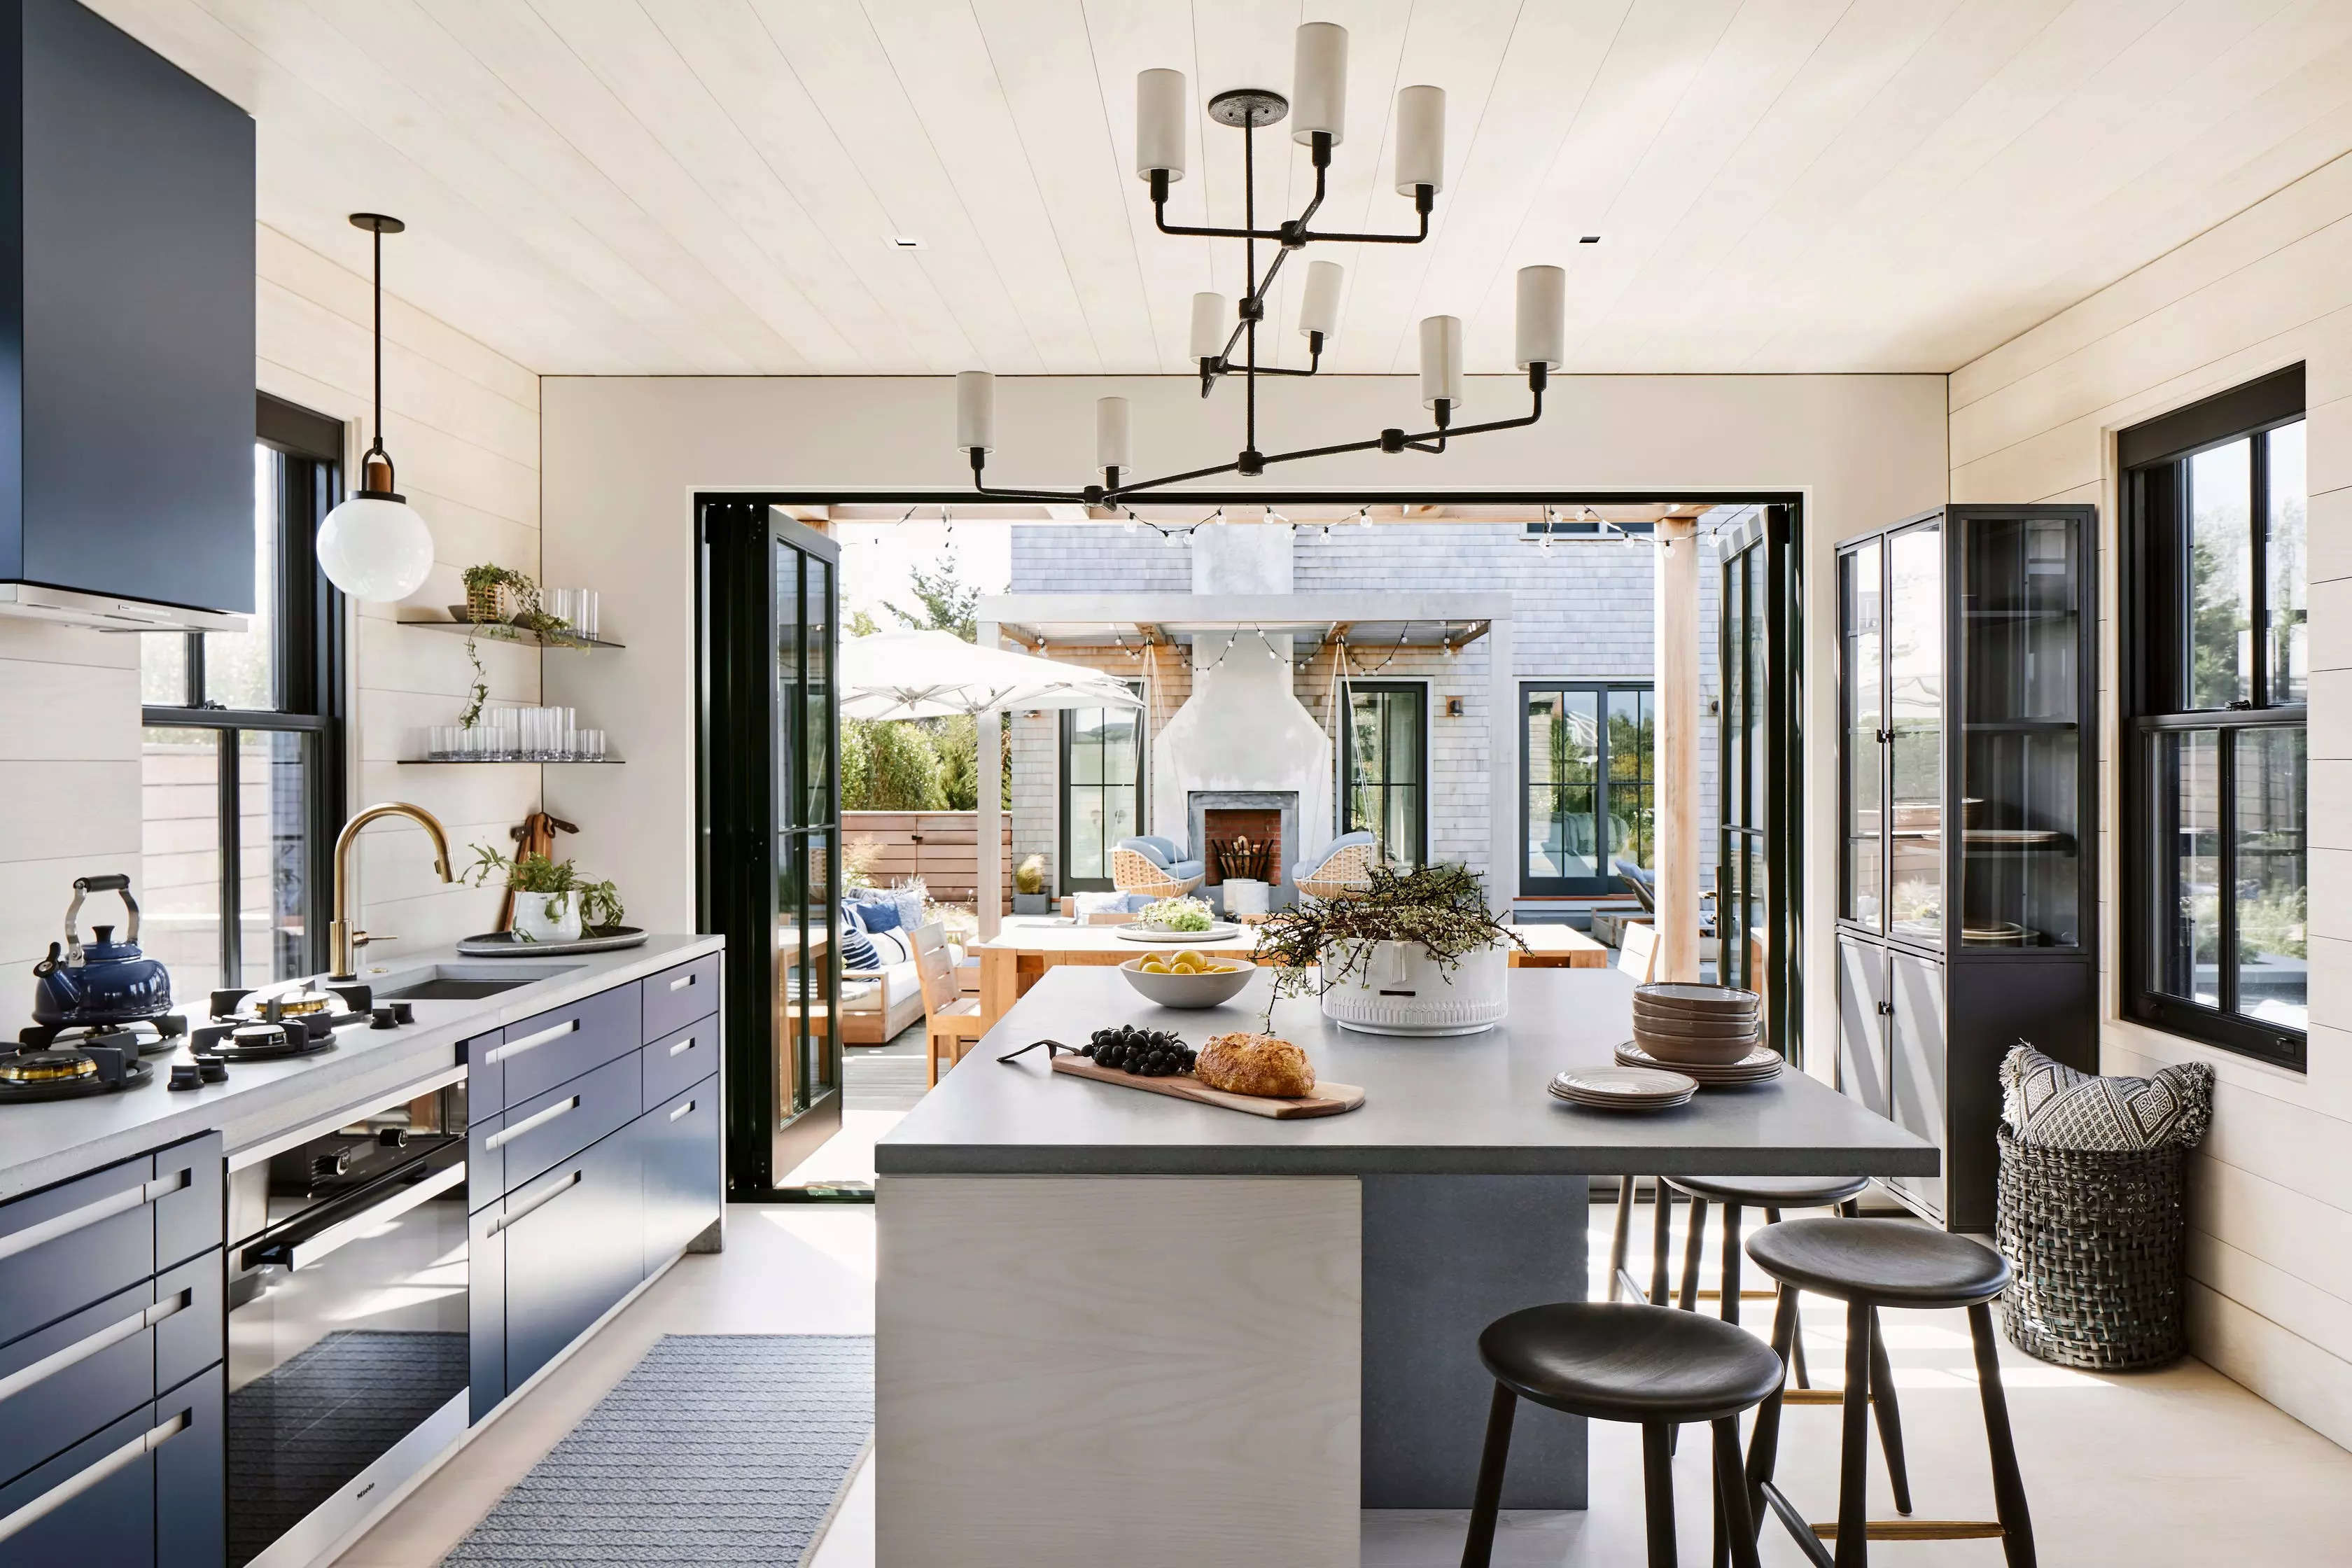 Kitchen that opens to patio